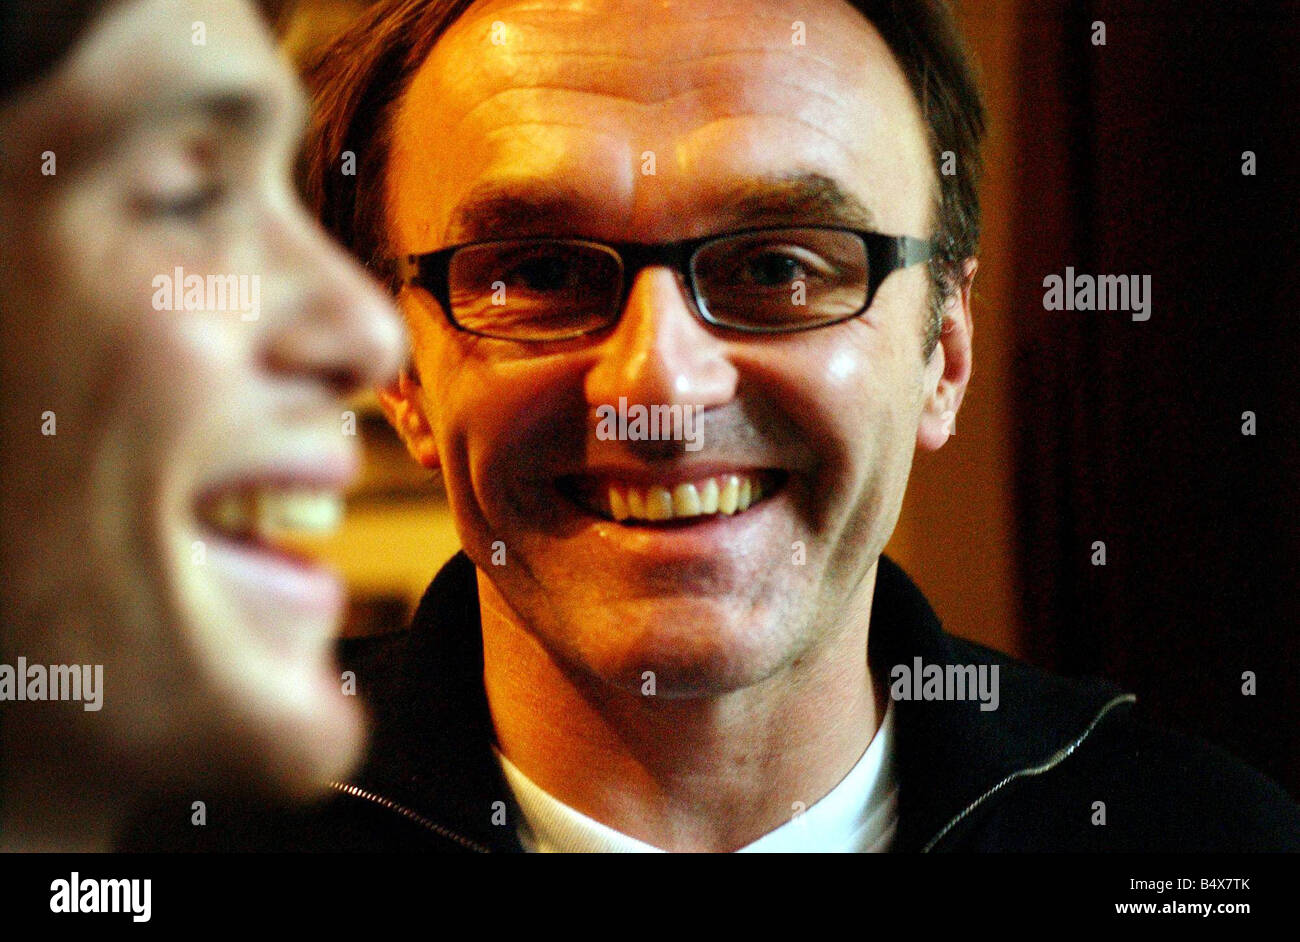 Film After 28 Days director Danny Boyle and actor Cillian Murphy Stock Photo